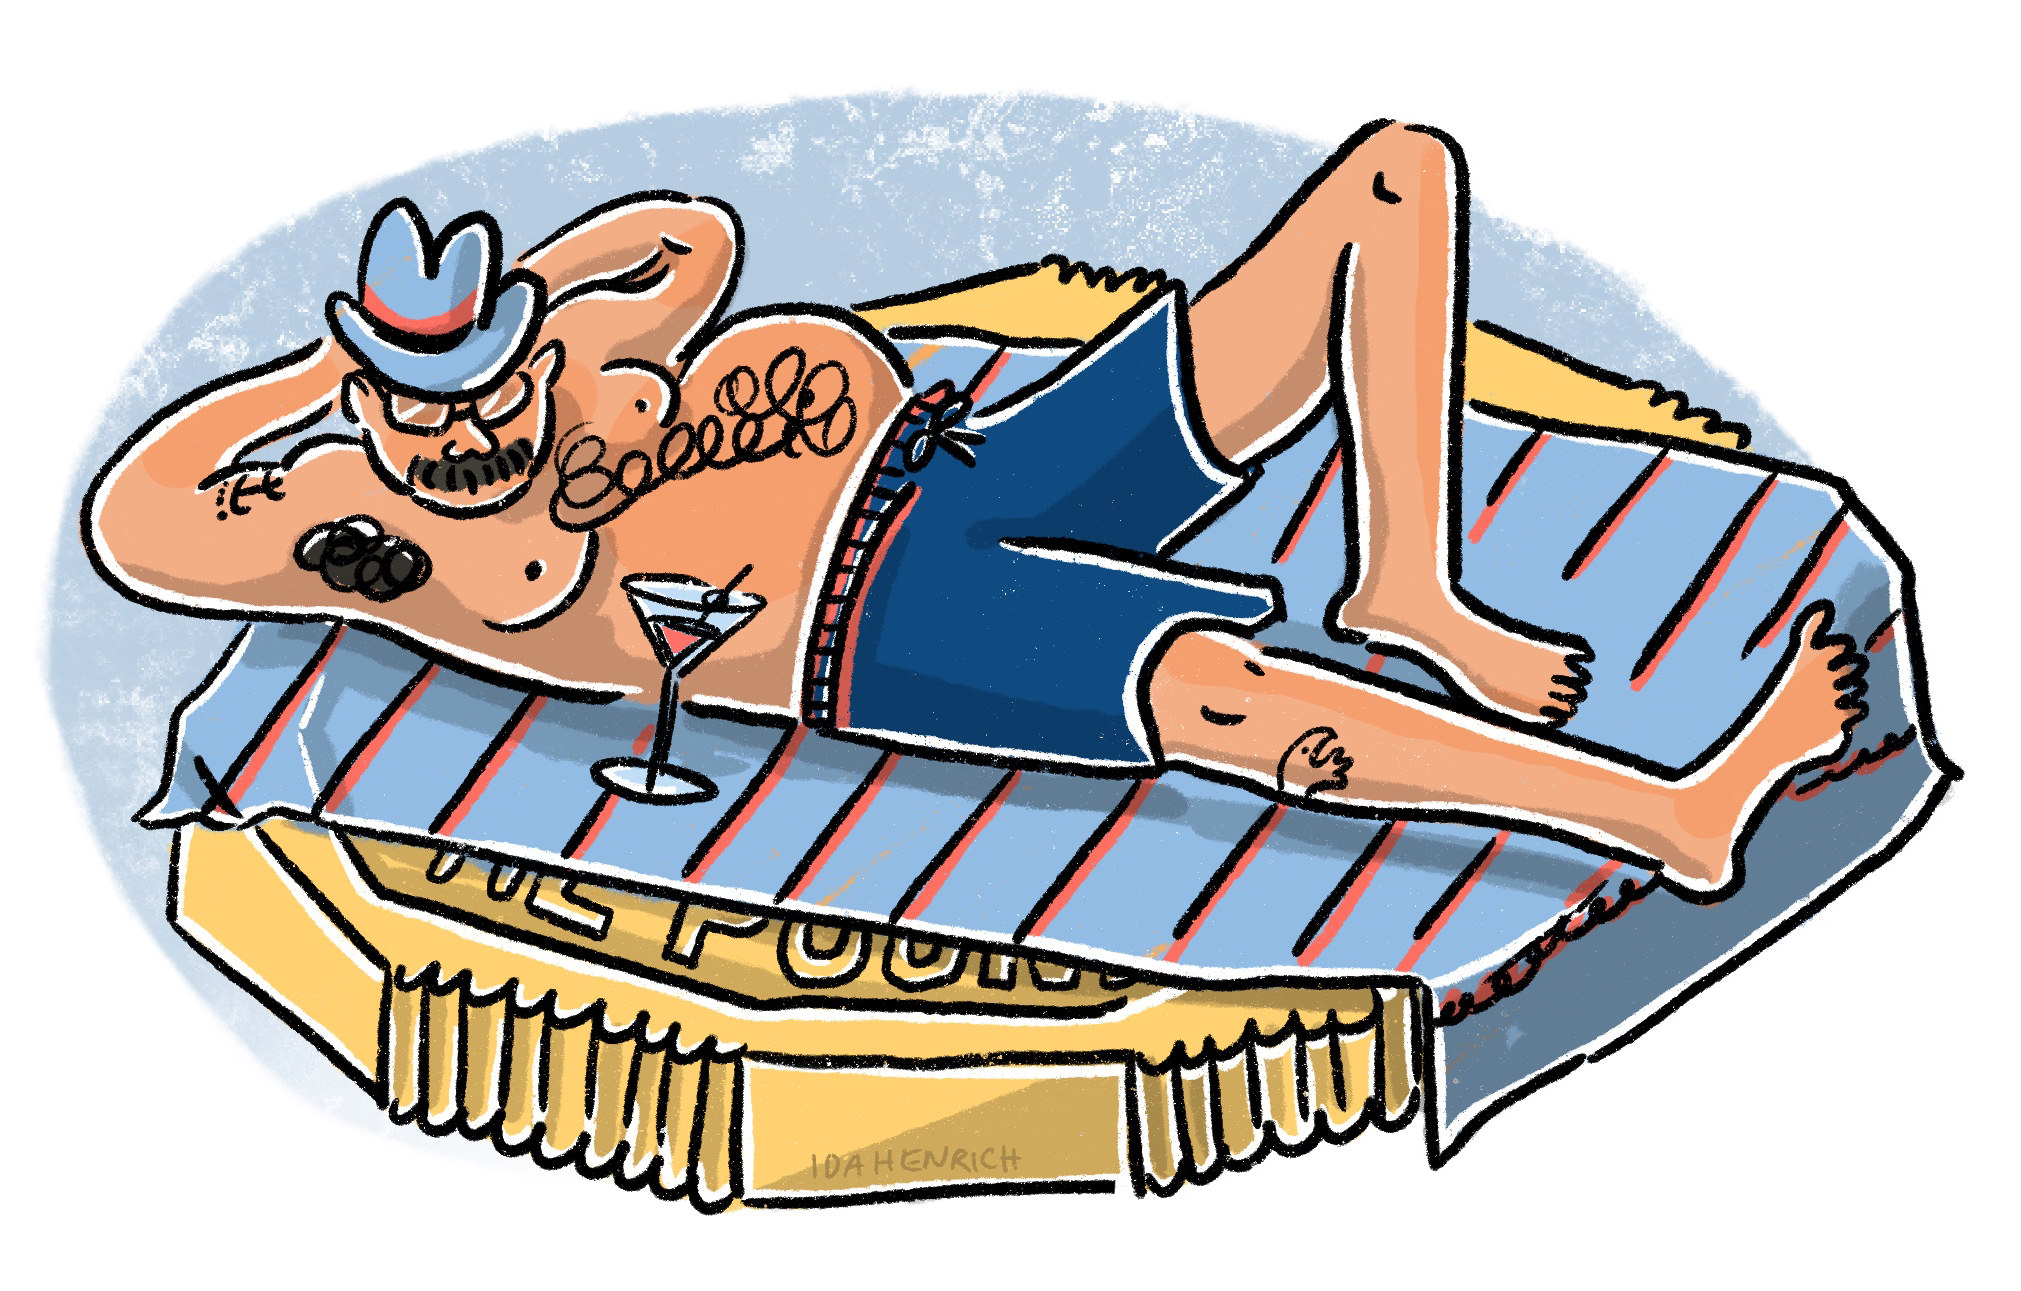 A sunburned man with a mustache and beer belly sunbathing on top of a massive pound coin with a cocktail. The image speaks about wealth, comfort, holiday and richness. ©Ida Henrich.